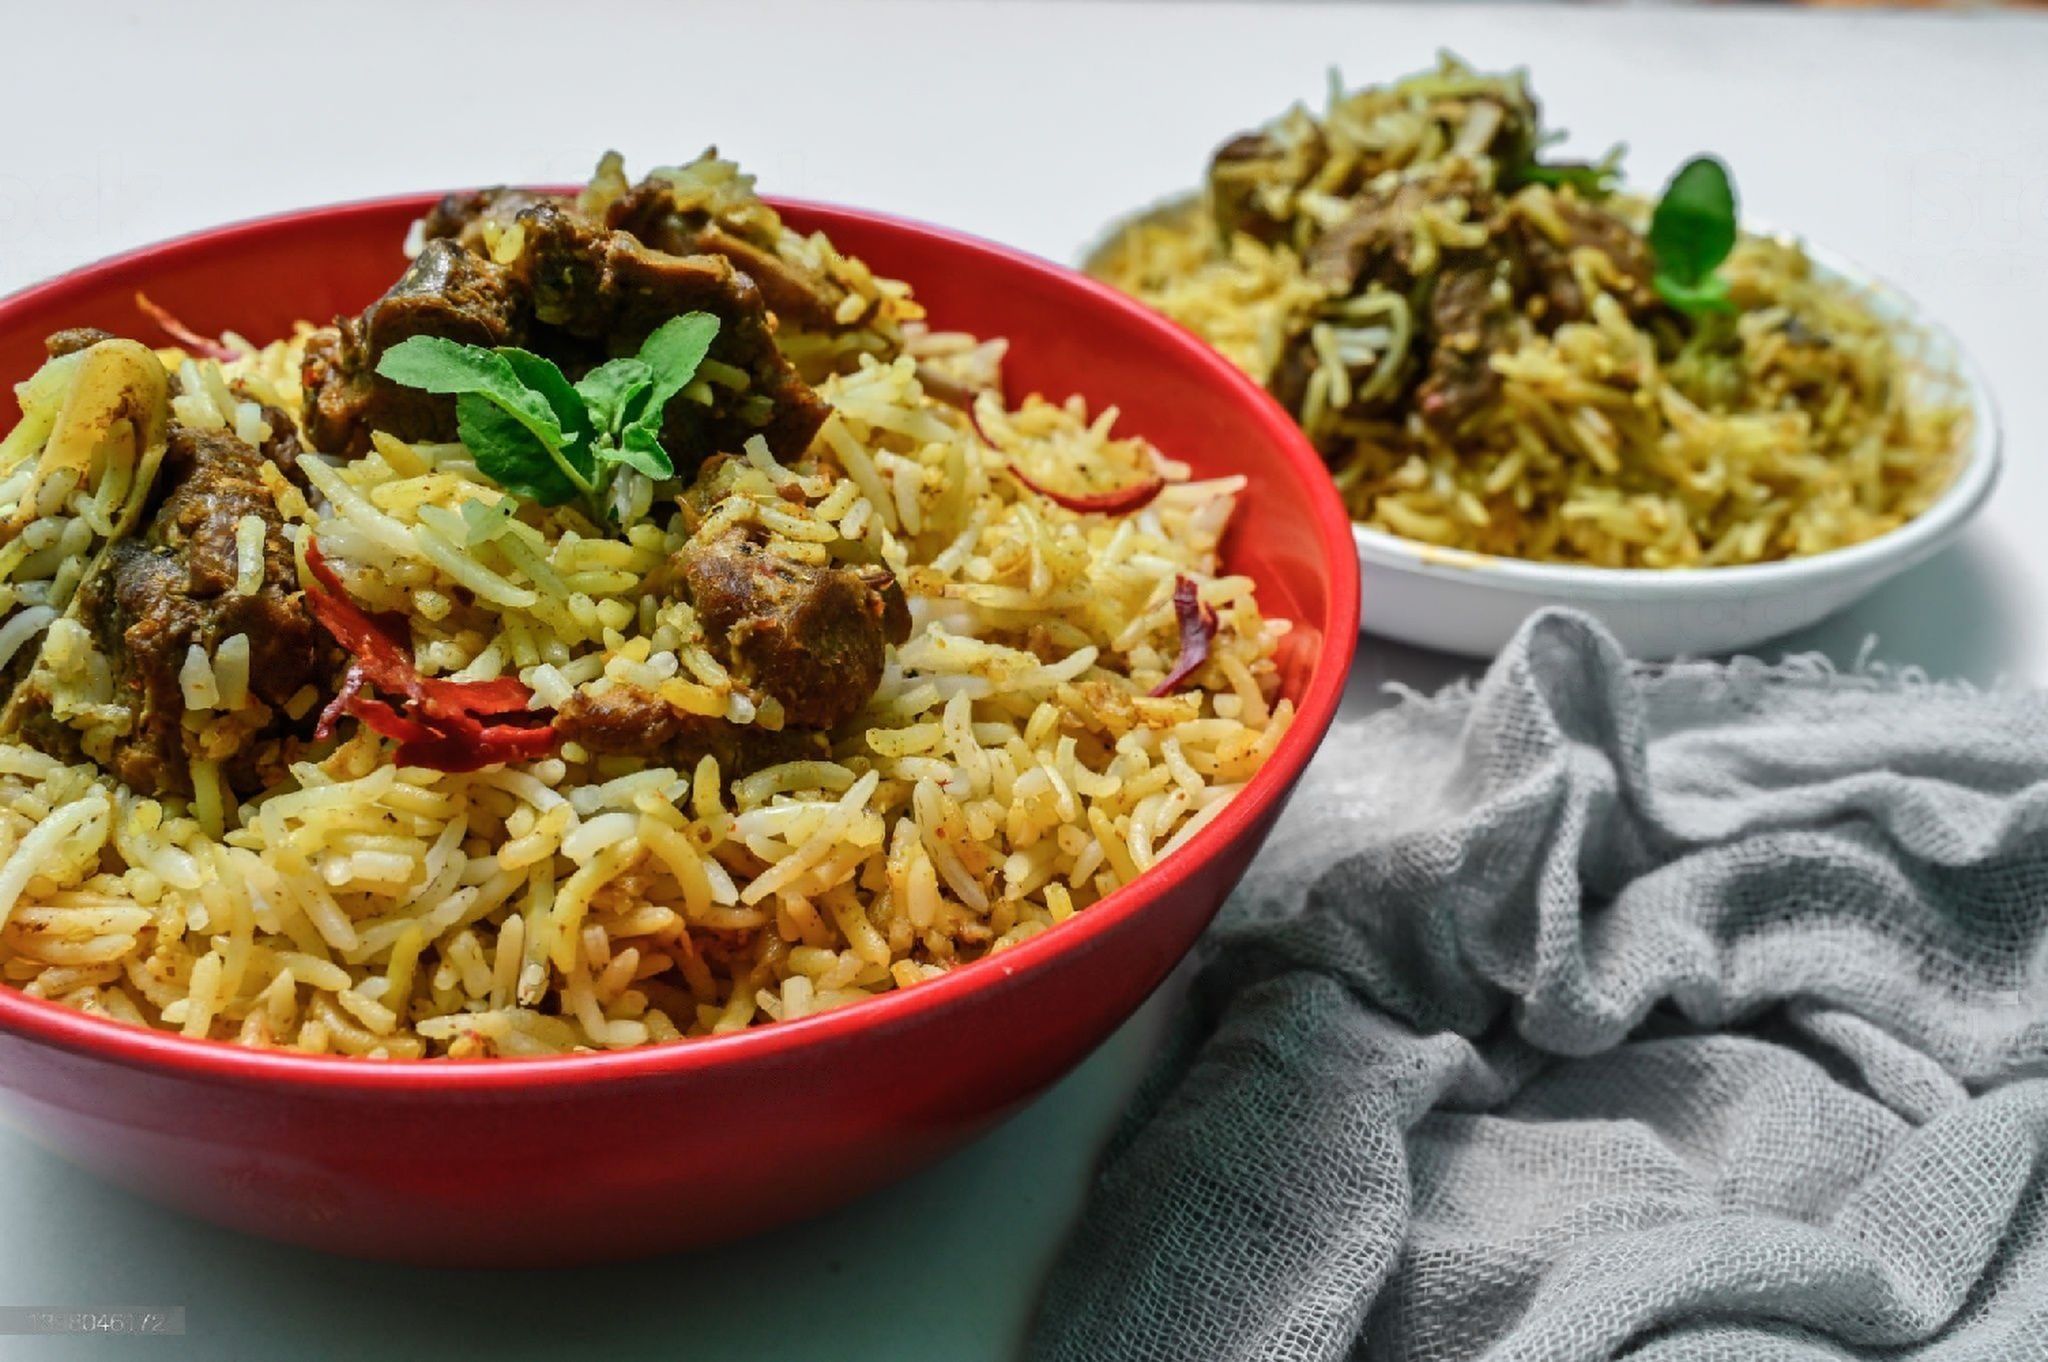 How To Make Special Beef Pulao or Delicious Beef Pulao Rice Recipe